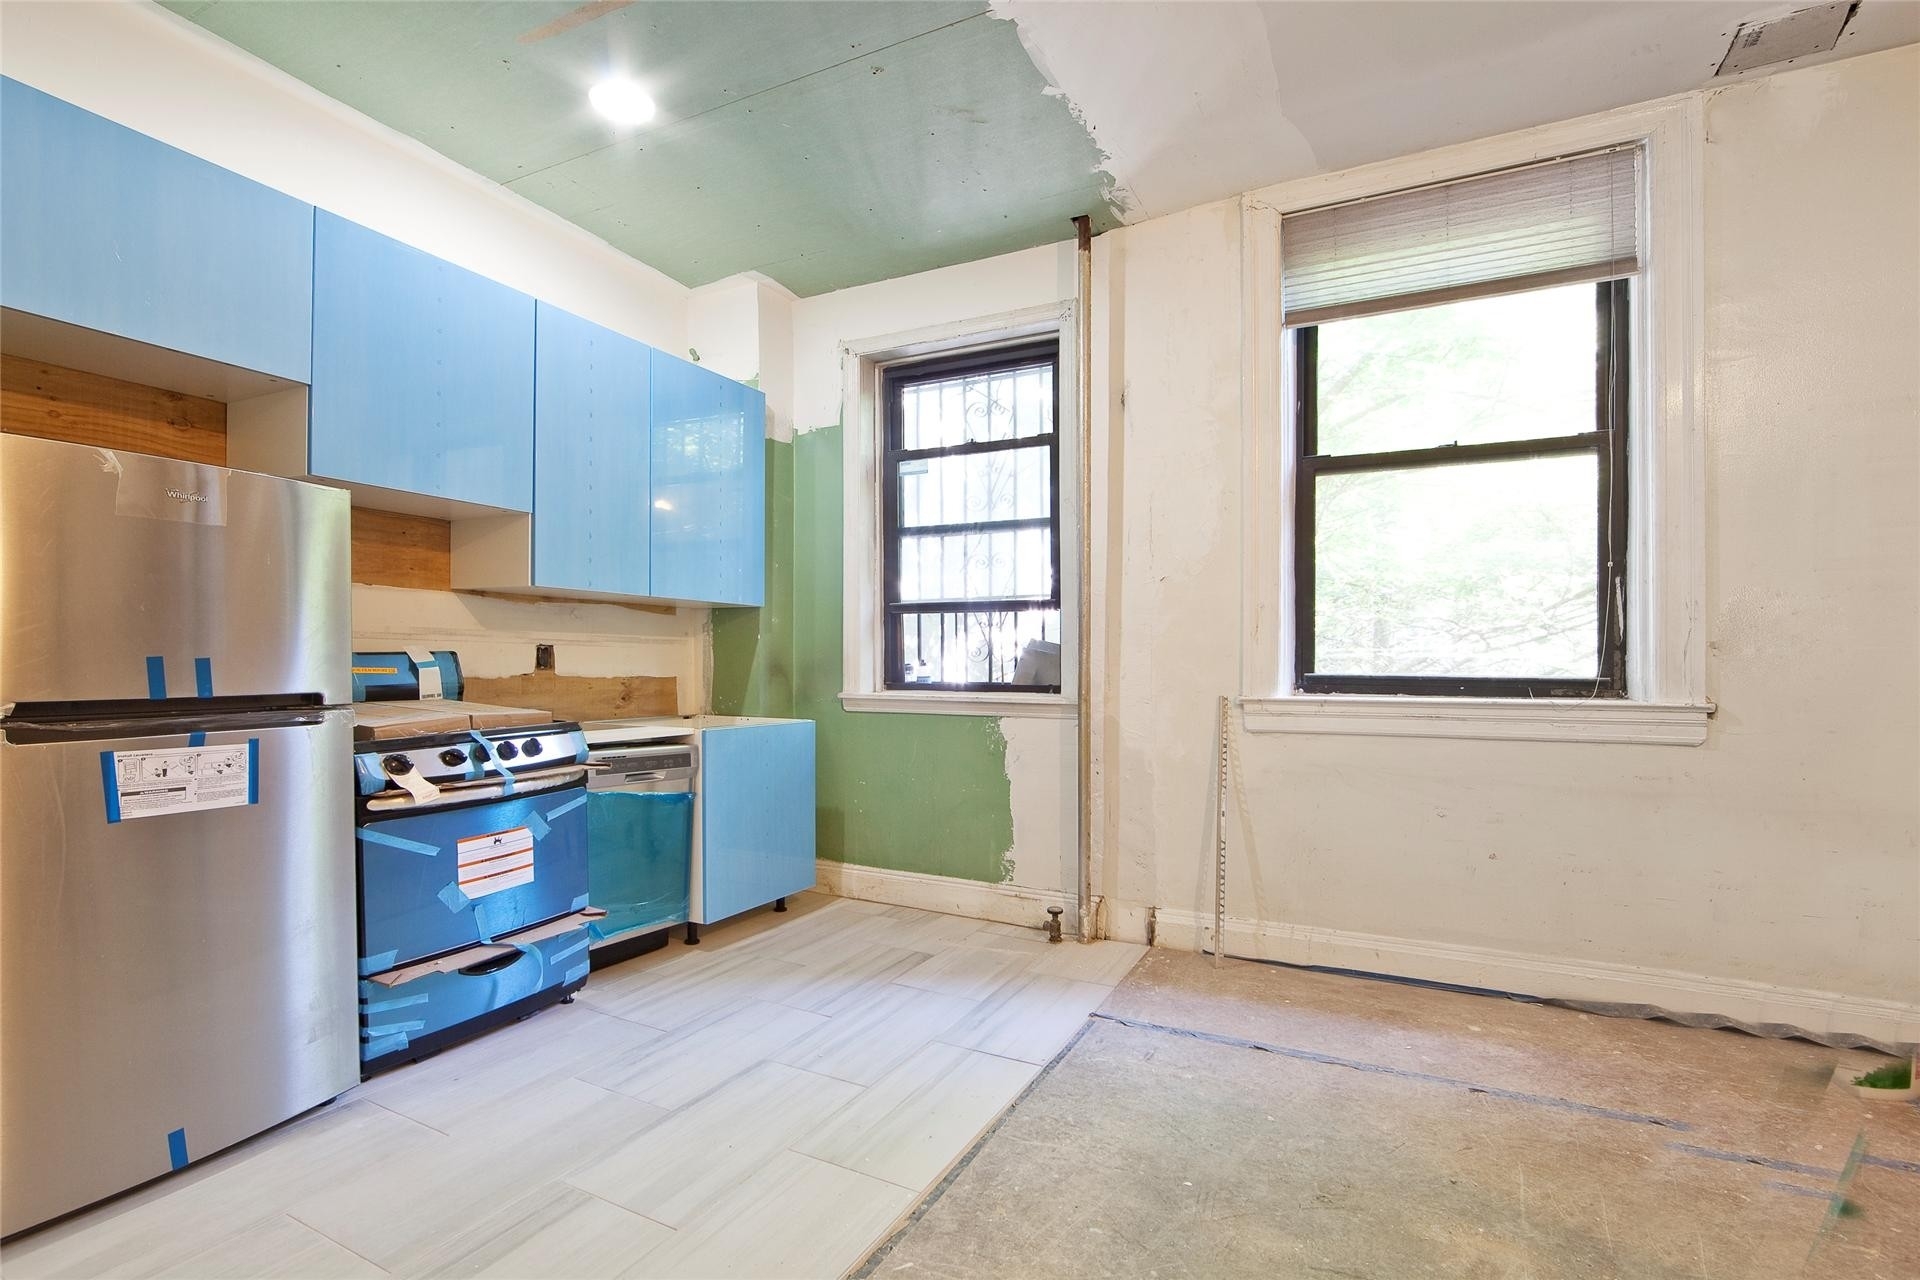 Property at 469 State St, 3R Brooklyn